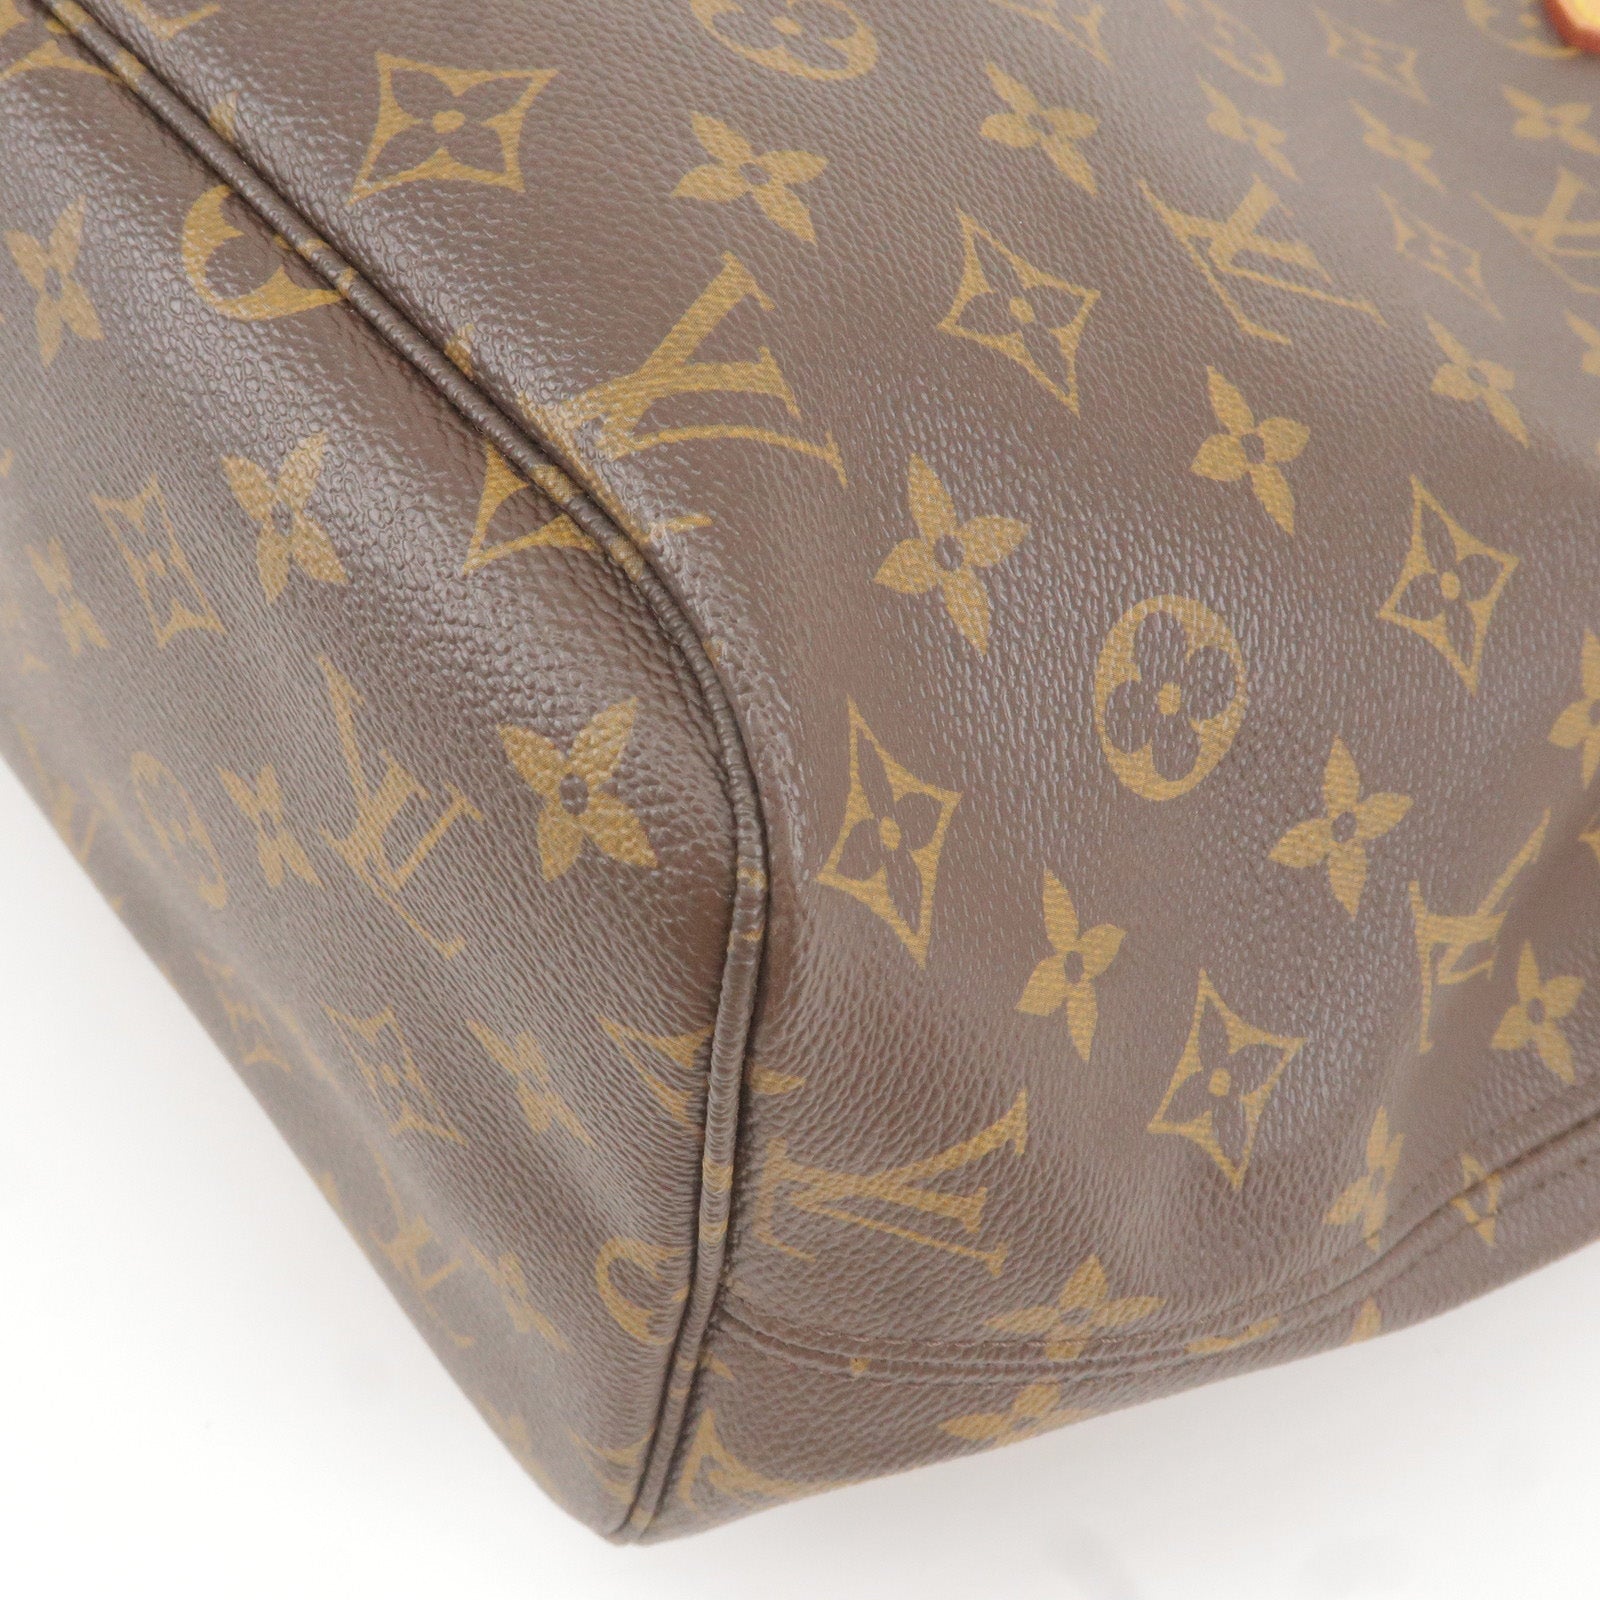 Neverfull - Louis Vuitton s Fornasetti-patterned coat for fall 21 - Tote -  M40156 – LVMH Moet Hennessy Louis Vuitton - Monogram - Bag - Louis - MM -  Vuitton